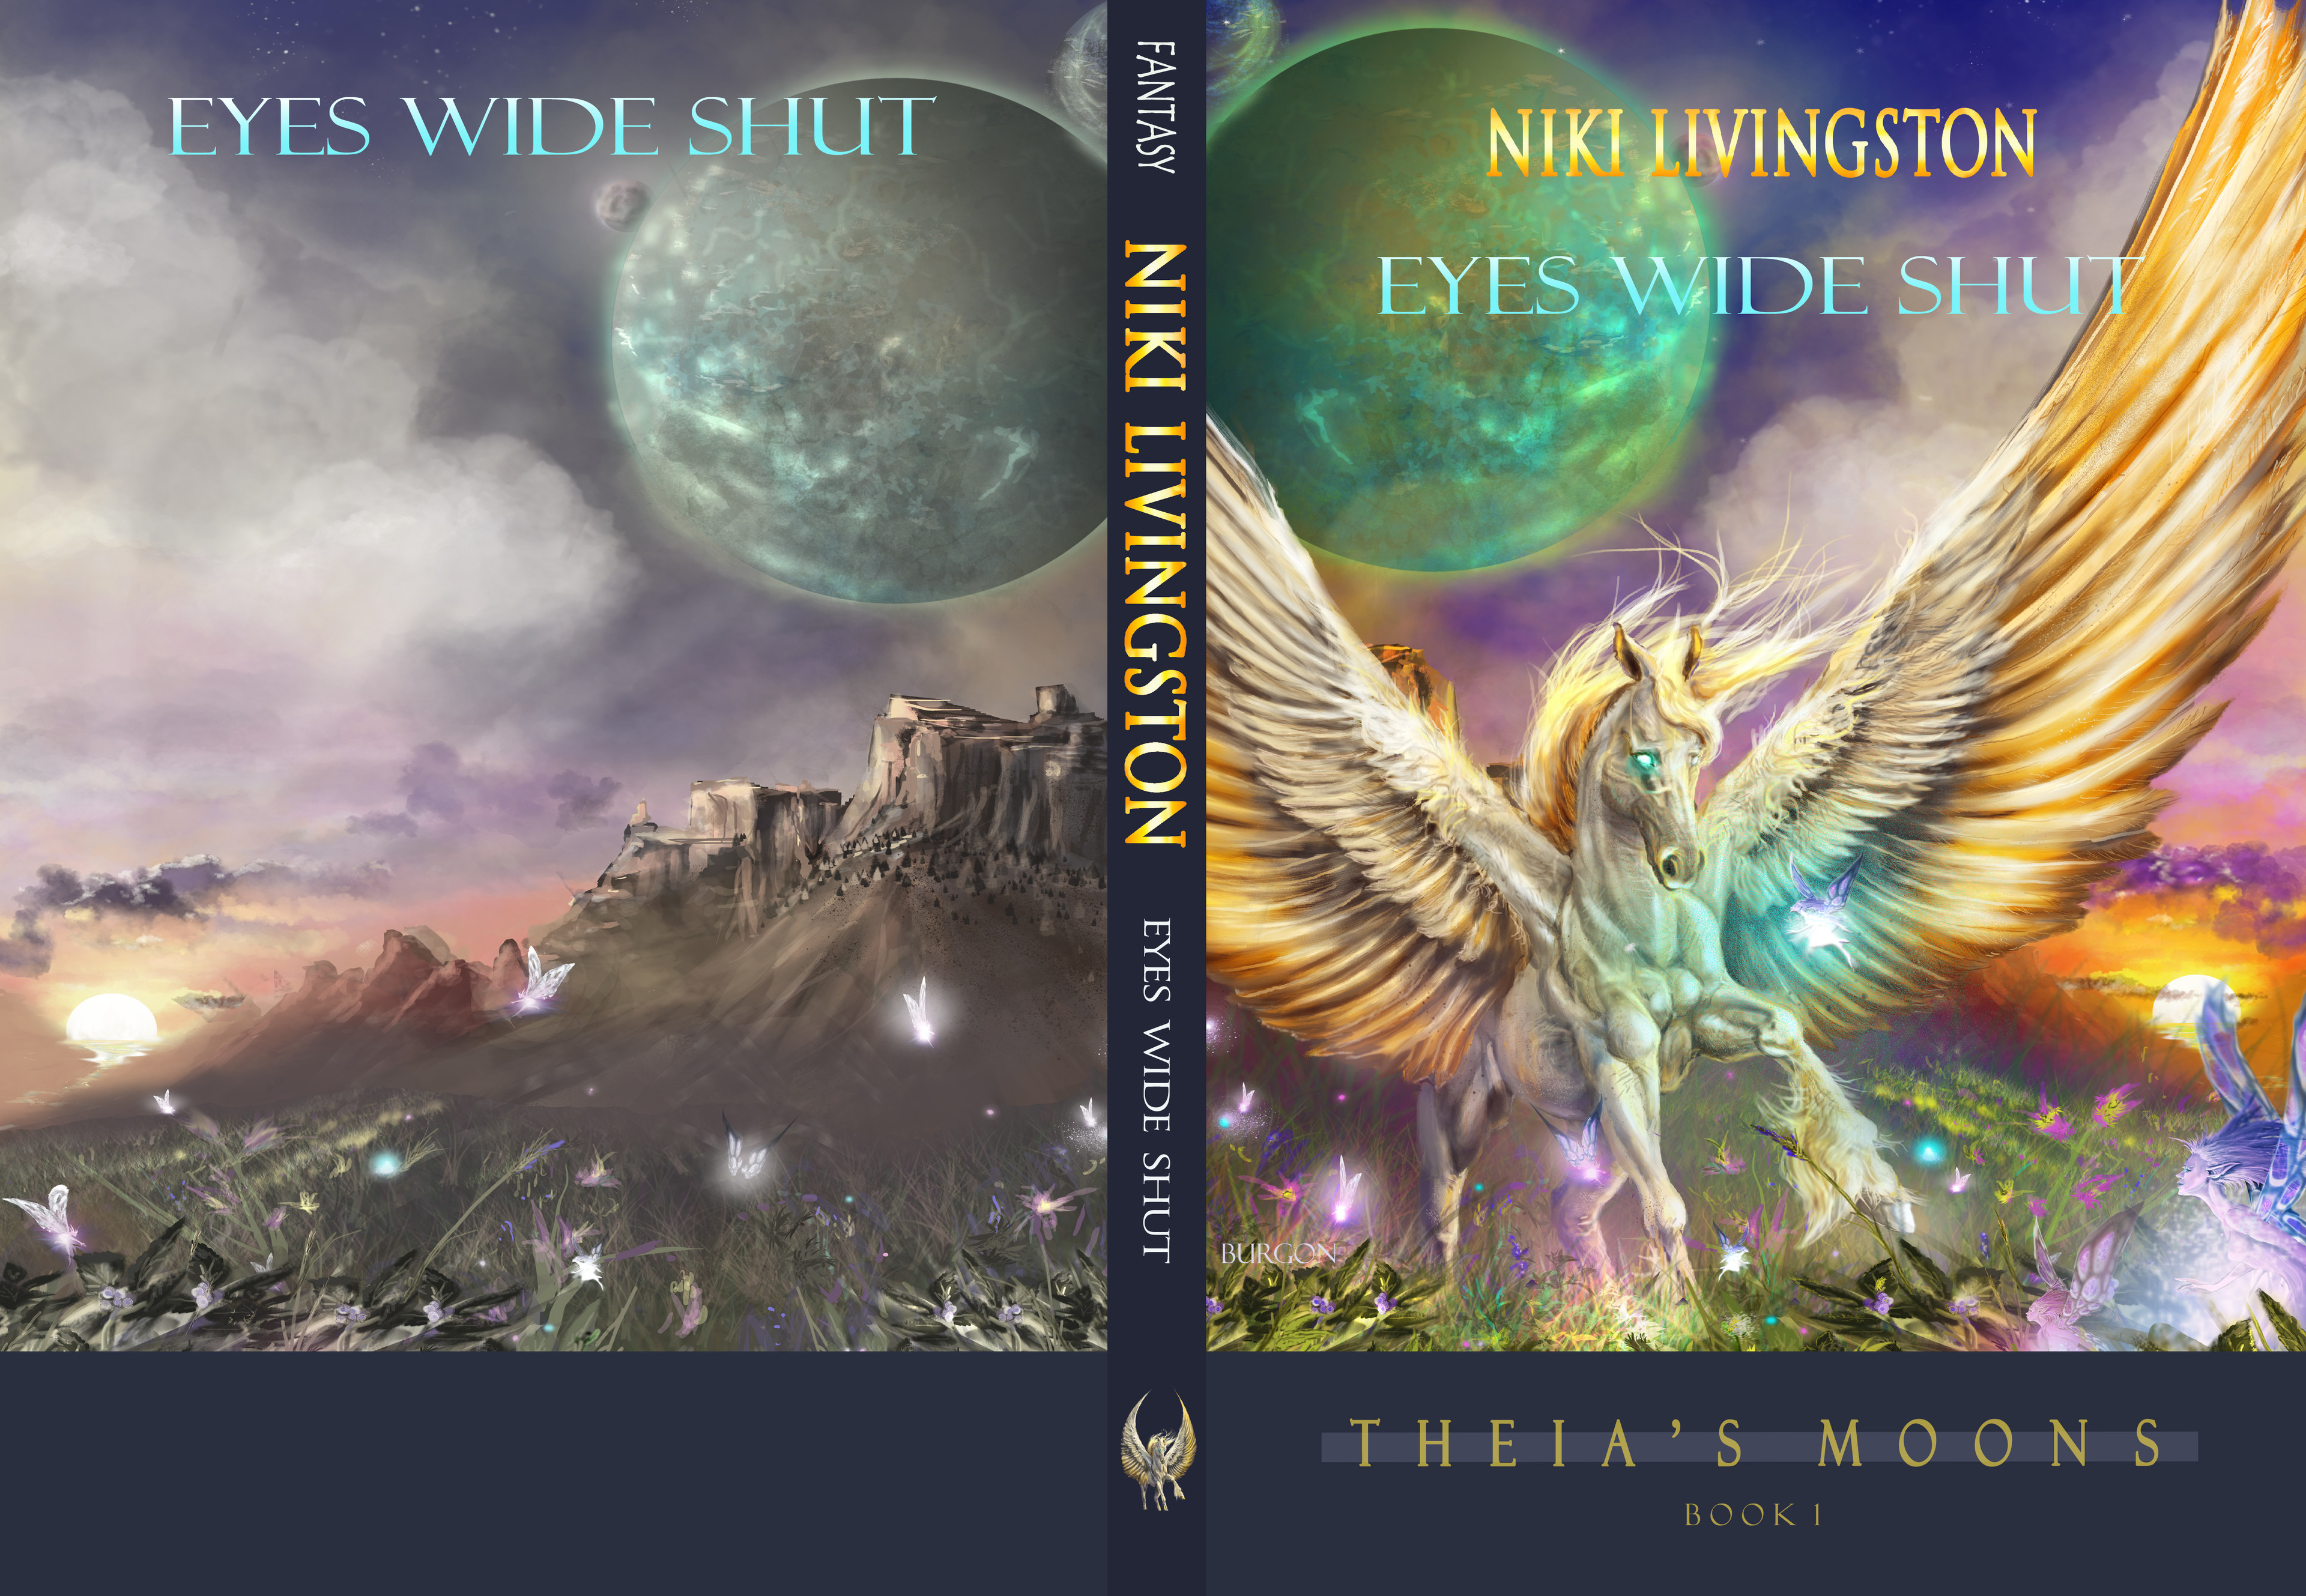 Completed book cover front and back